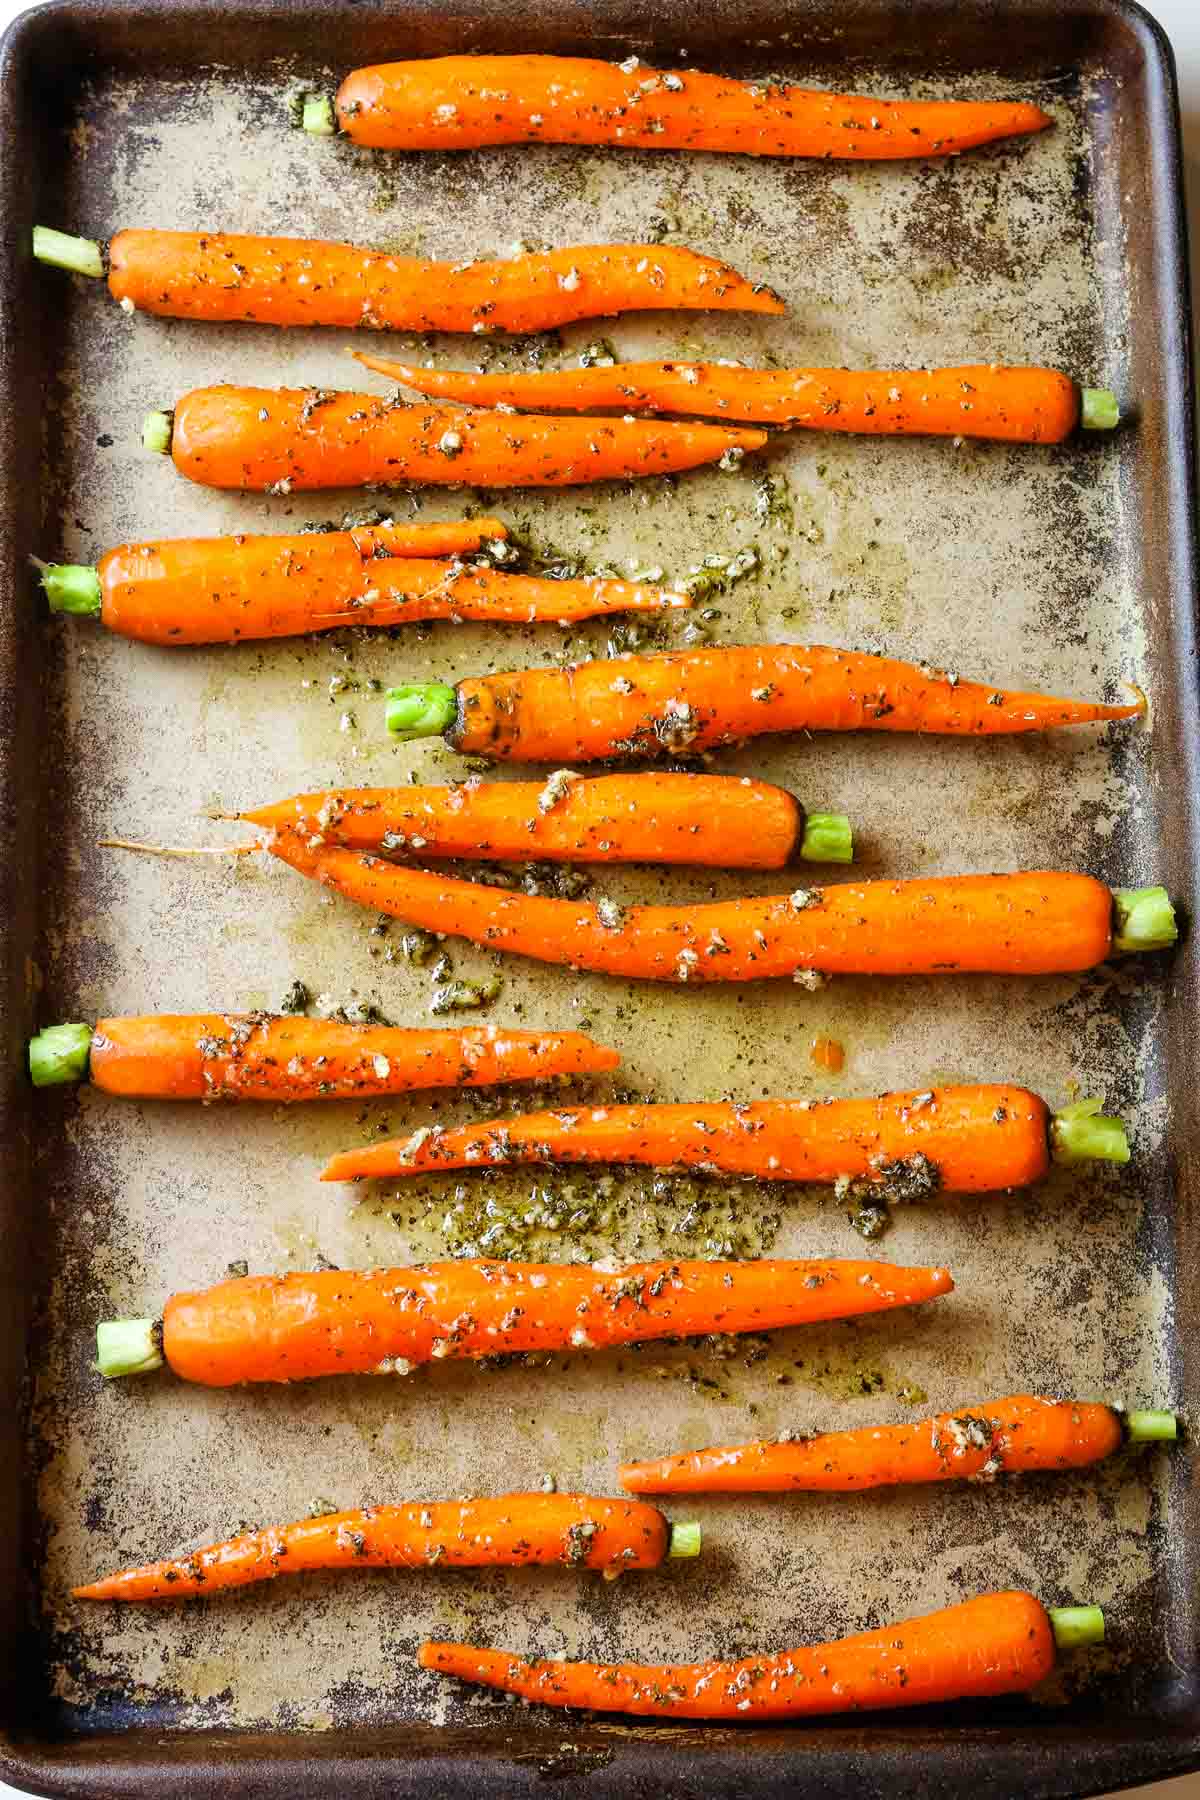 carrots spread out on sheet.